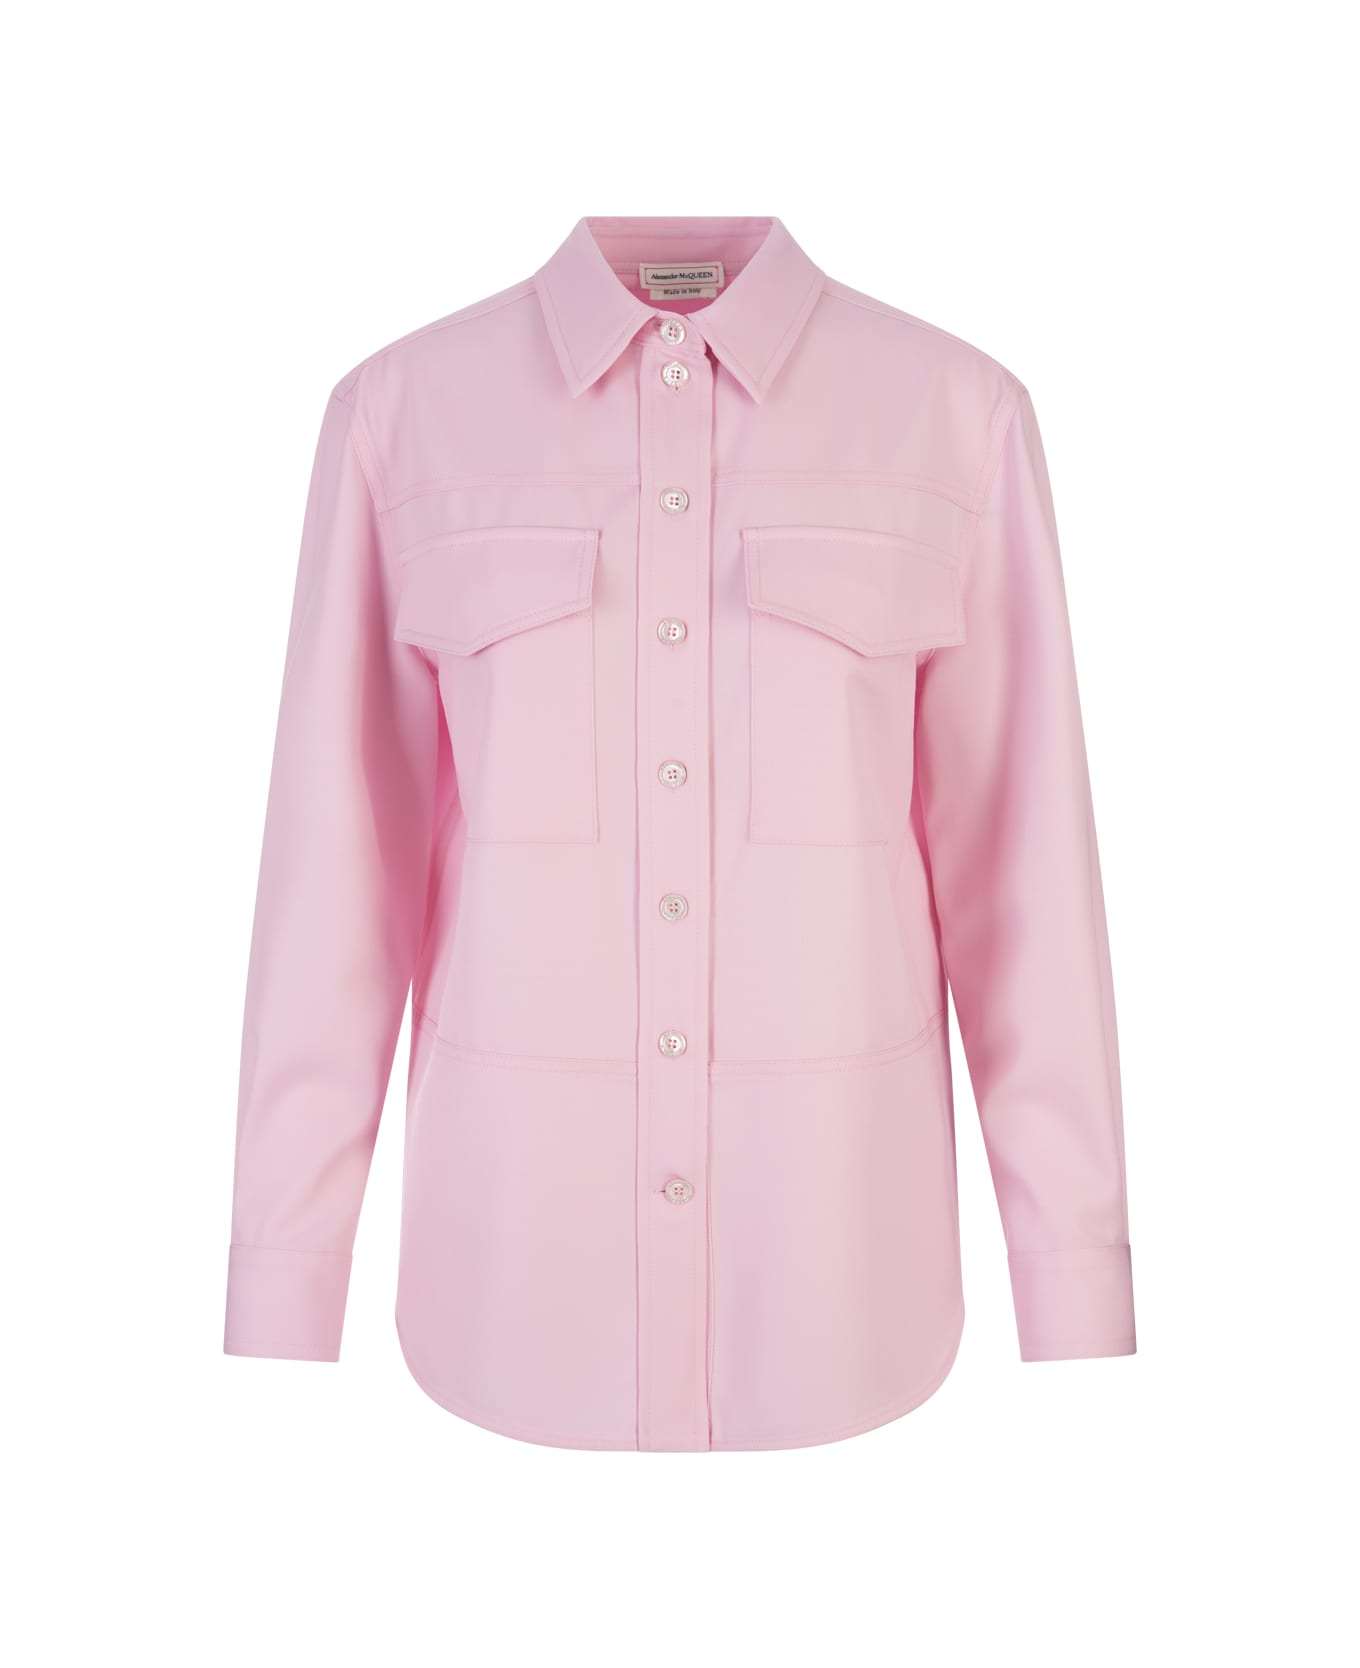 Alexander McQueen Shirt With Military Pockets In Light Pink - Pink シャツ